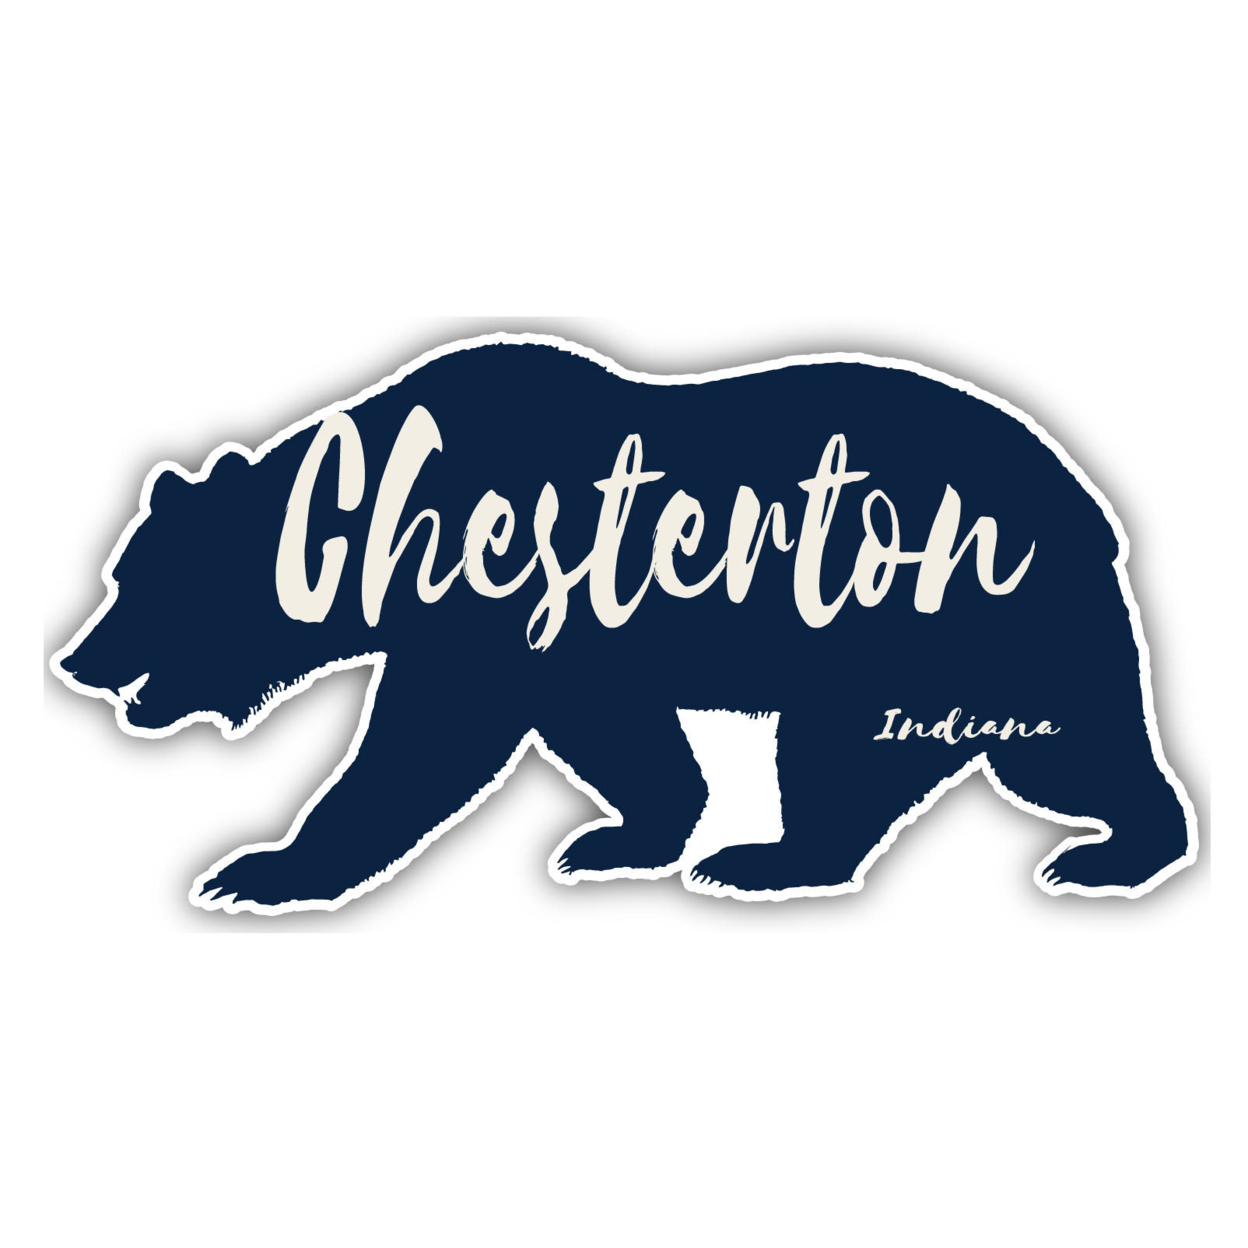 Chesterton Indiana Souvenir Decorative Stickers (Choose Theme And Size) - Single Unit, 2-Inch, Adventures Awaits